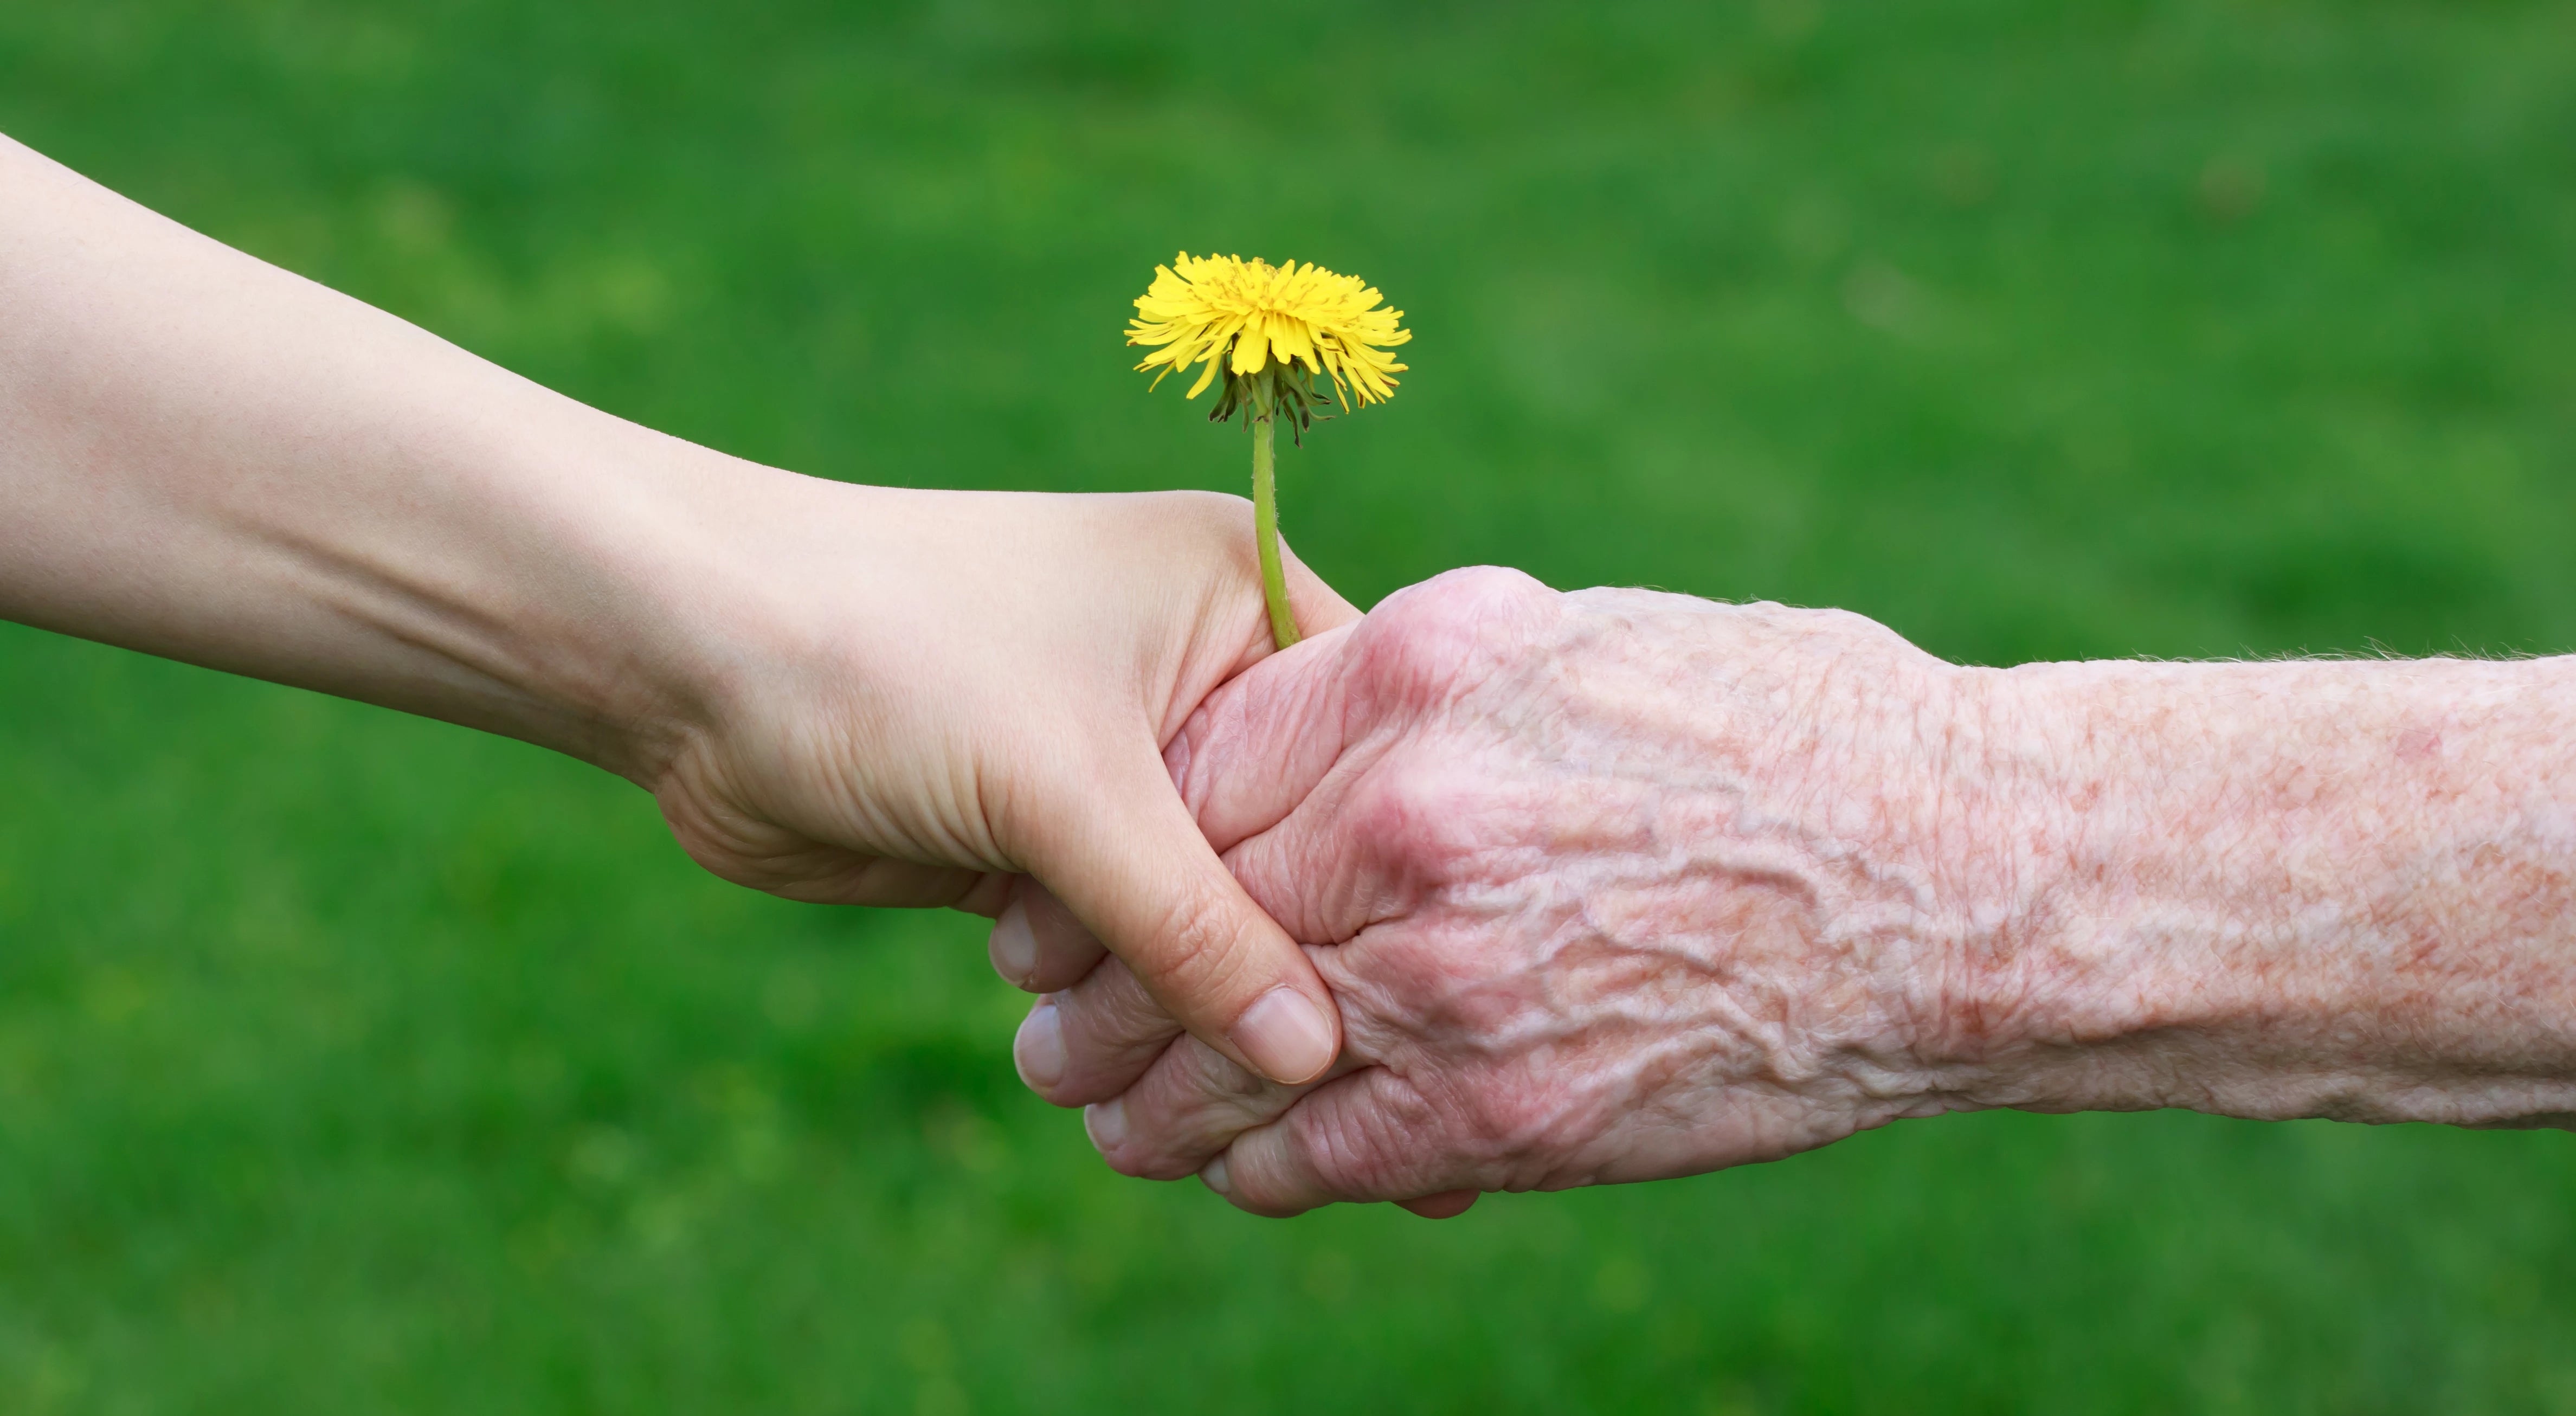 A close up of an elderly hand holding a young hand and flower